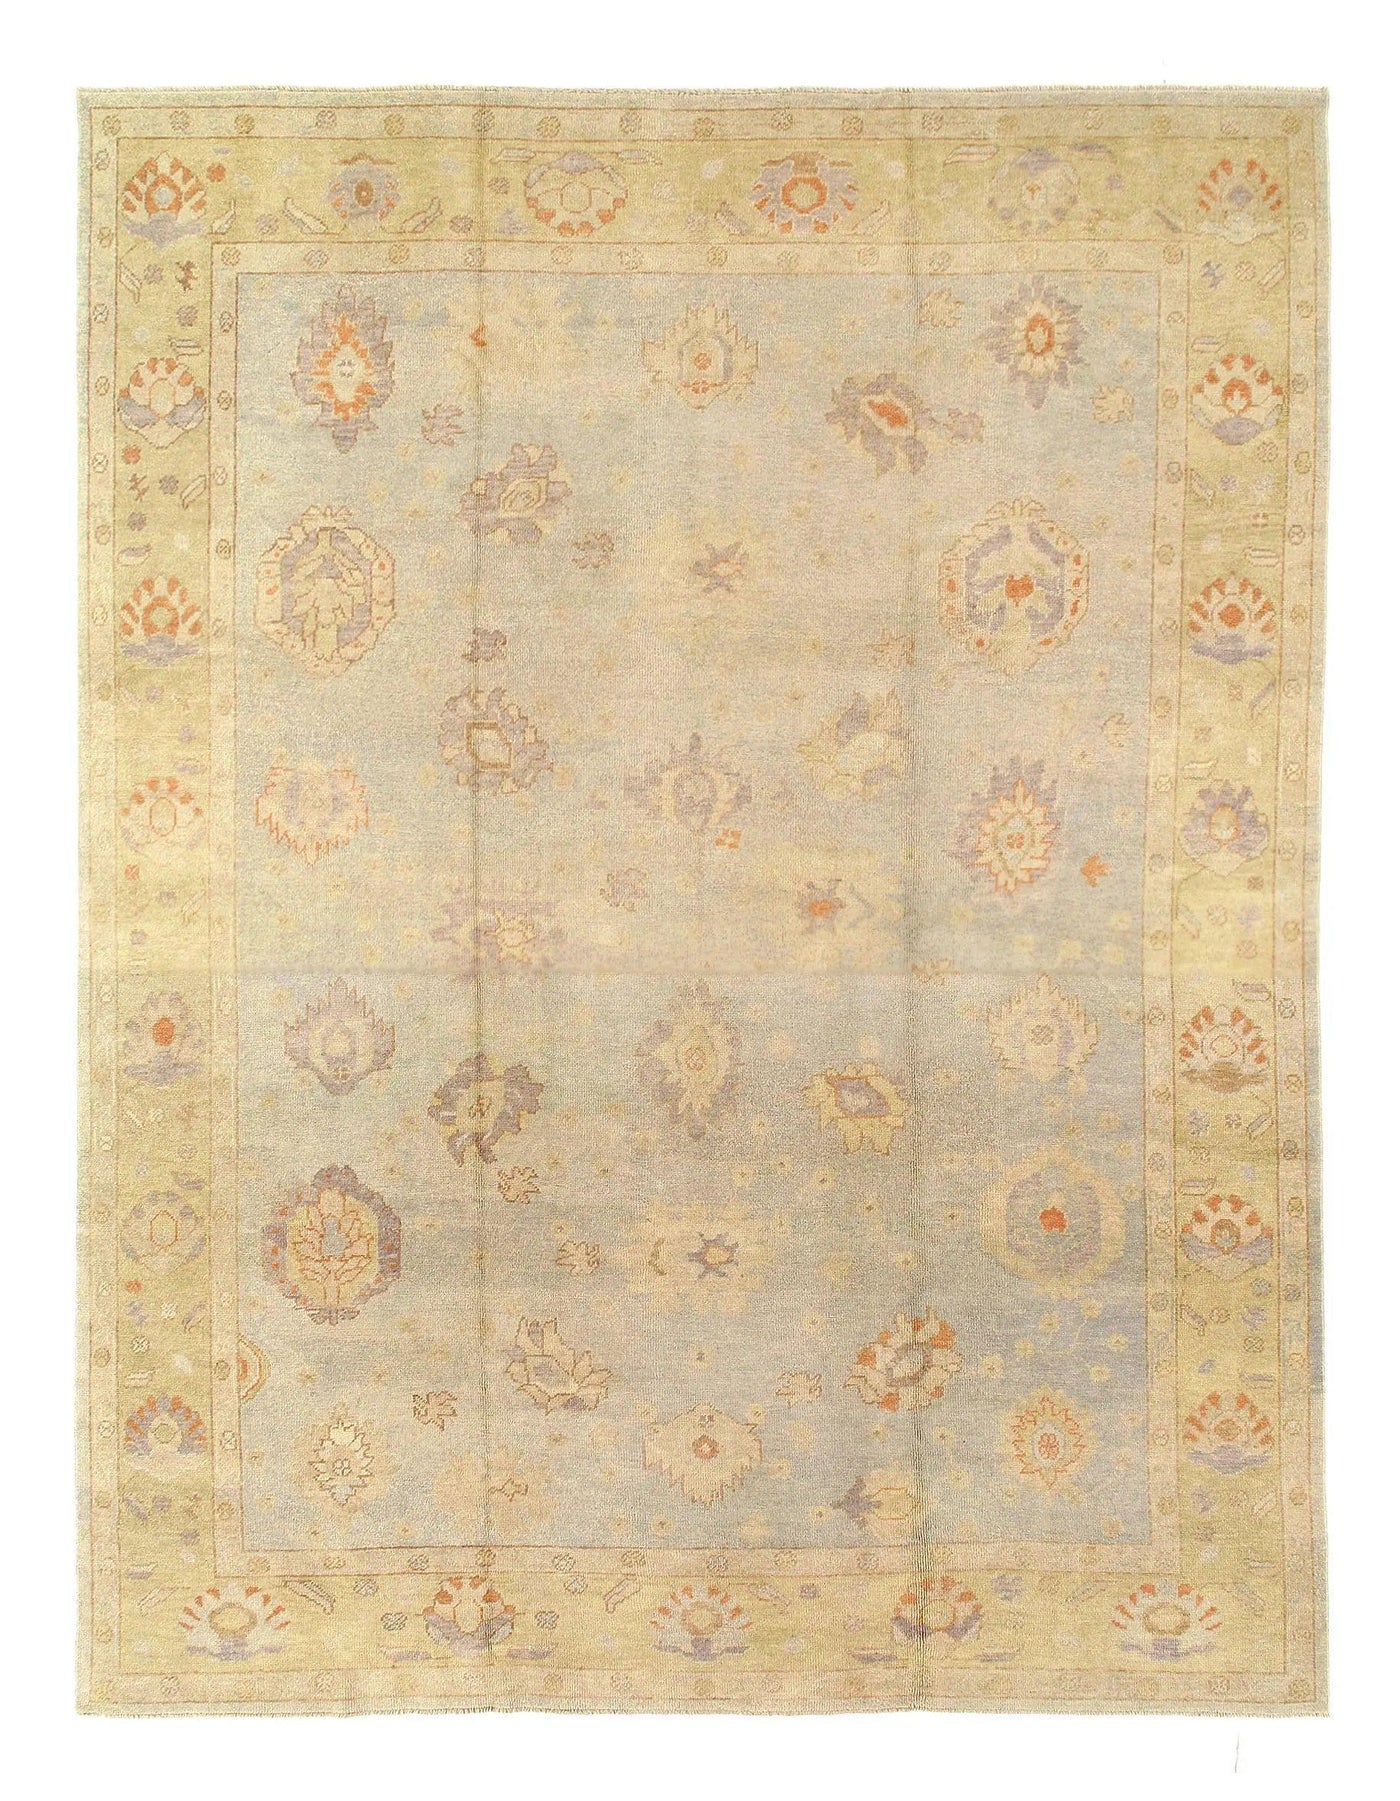 Light blue Hand Knotted Turkish Rug - 11' X 14'